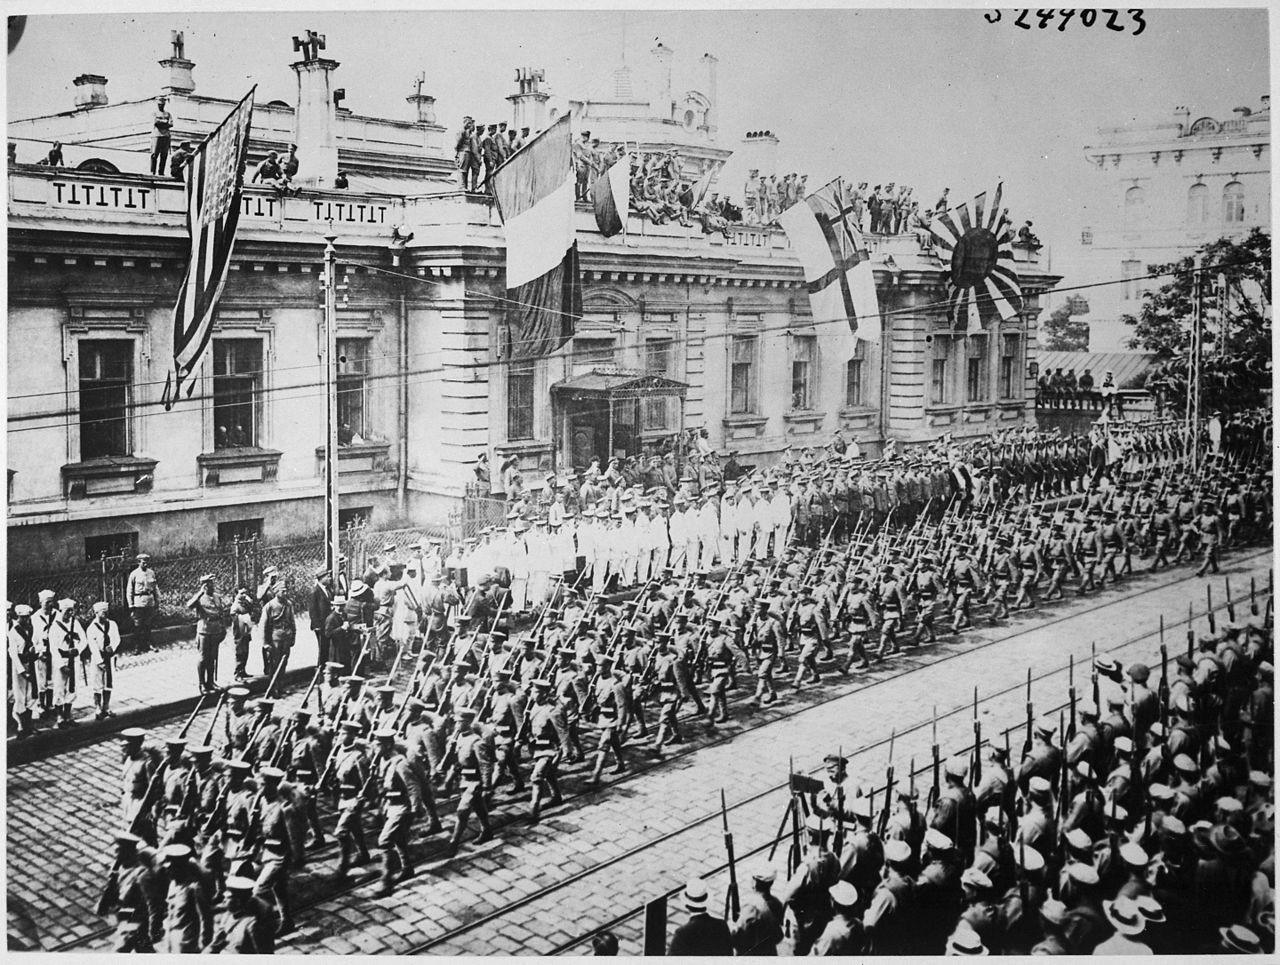 Vladivostok, Russia, September 1919. Soldiers and sailors from many countries are lined up in front of the Allies Headquarters Building.